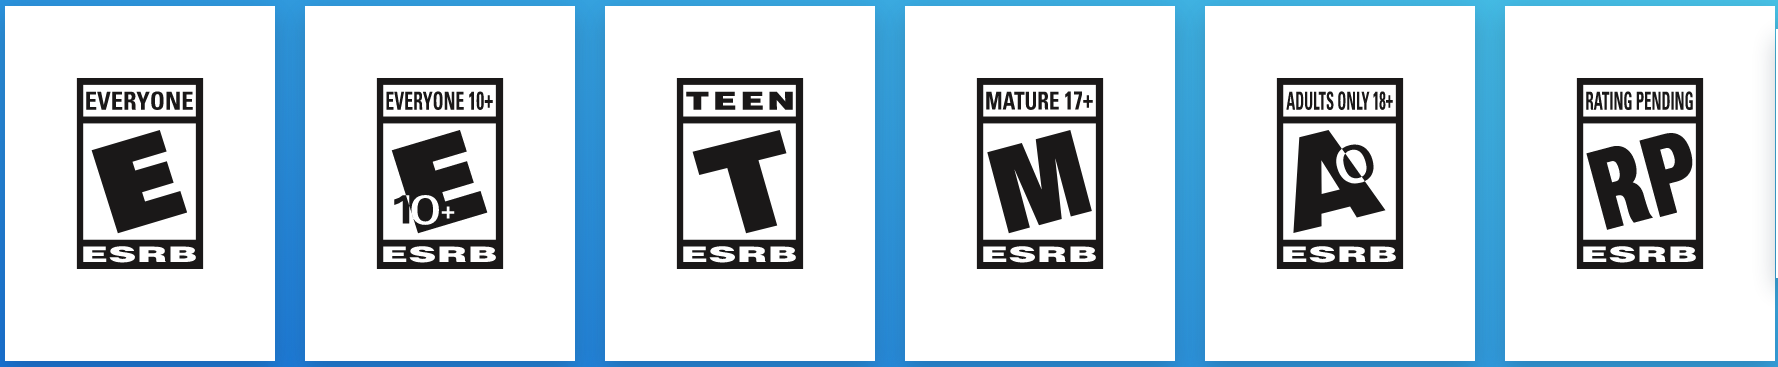 rated m games for switch